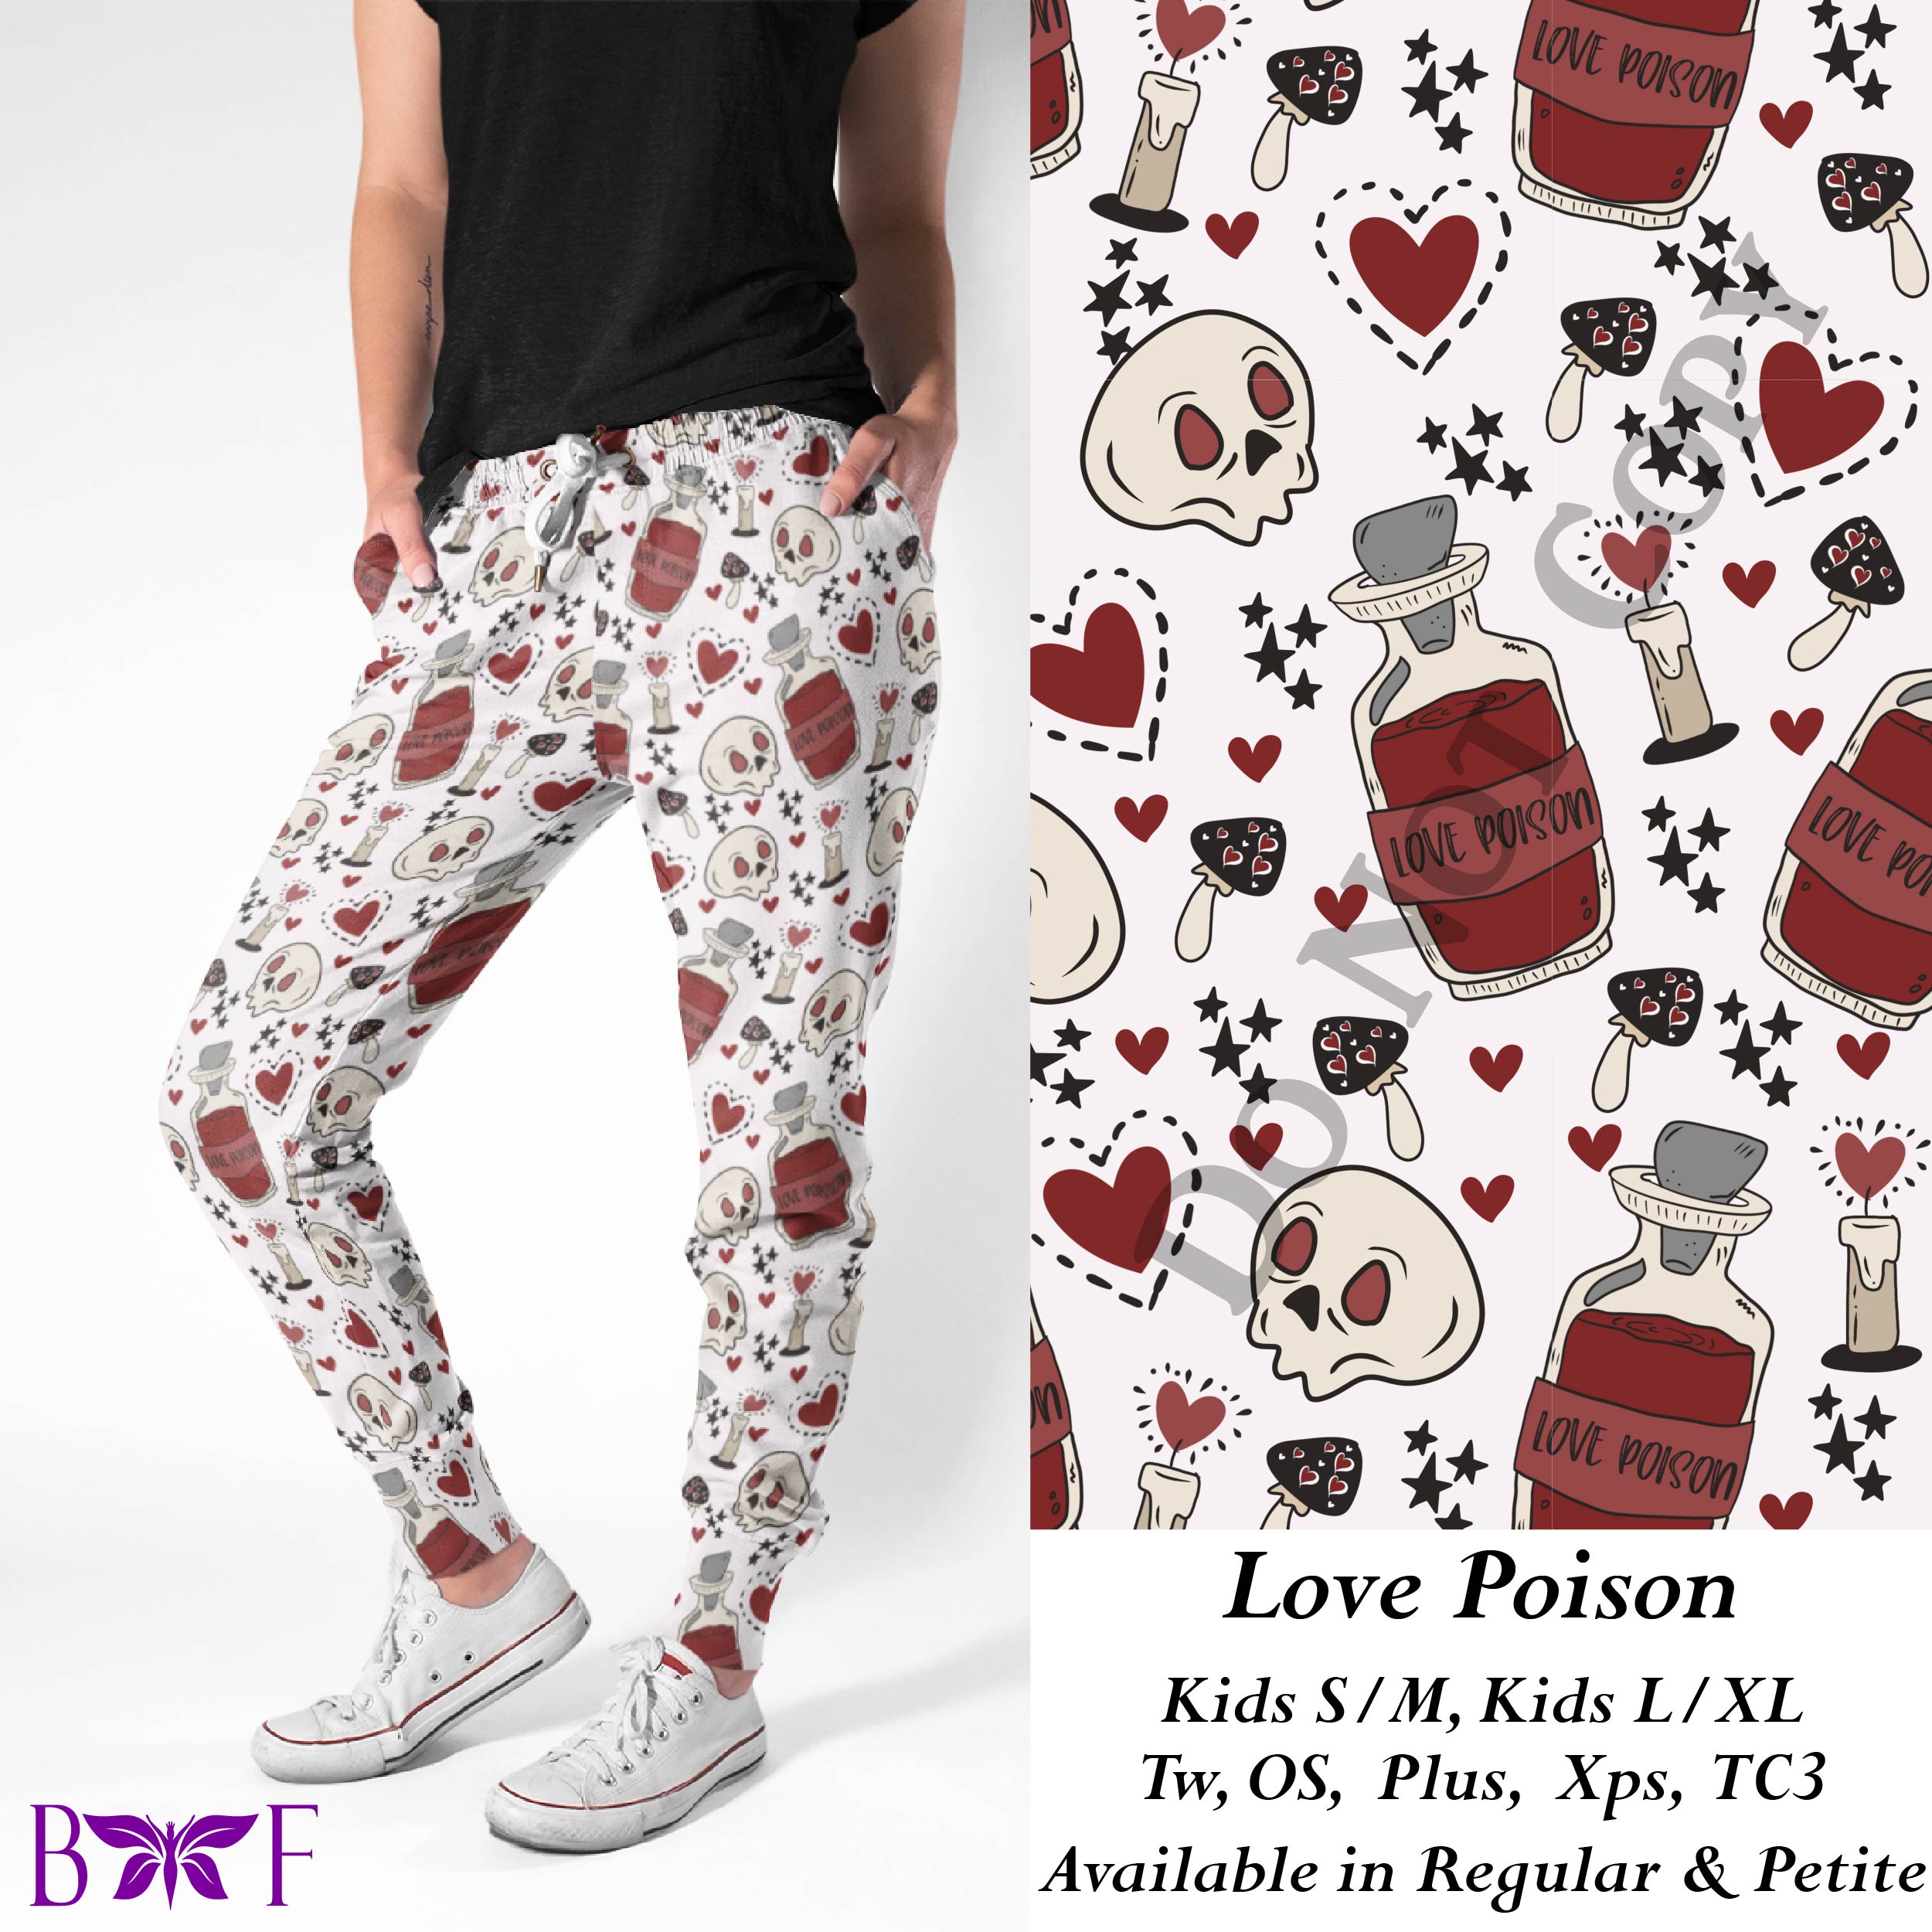 Love Poison leggings with pockets